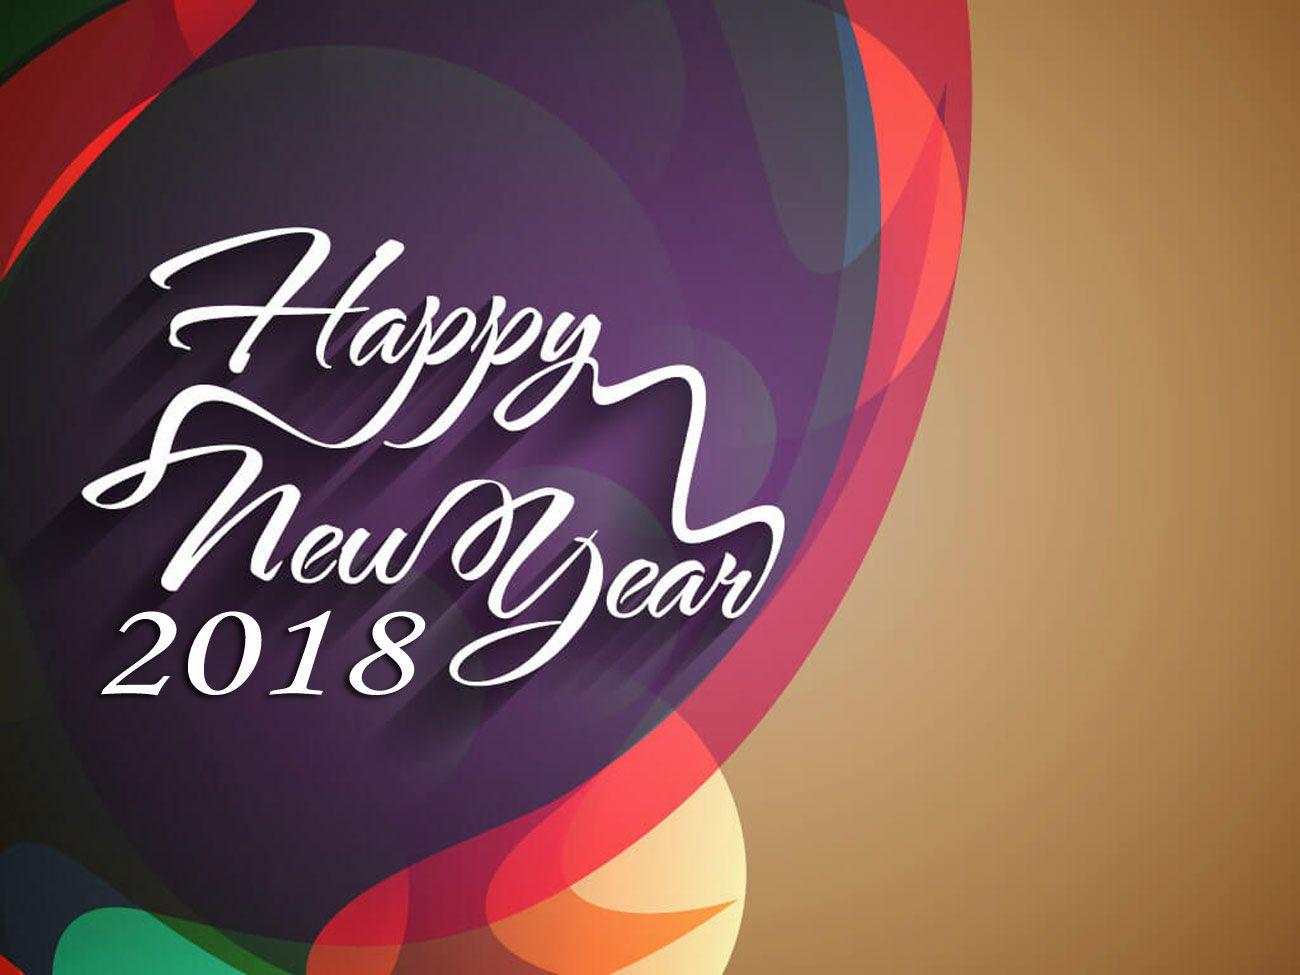 Happy New Year 2018 HD Wallpaper, Image, Picture, GIF